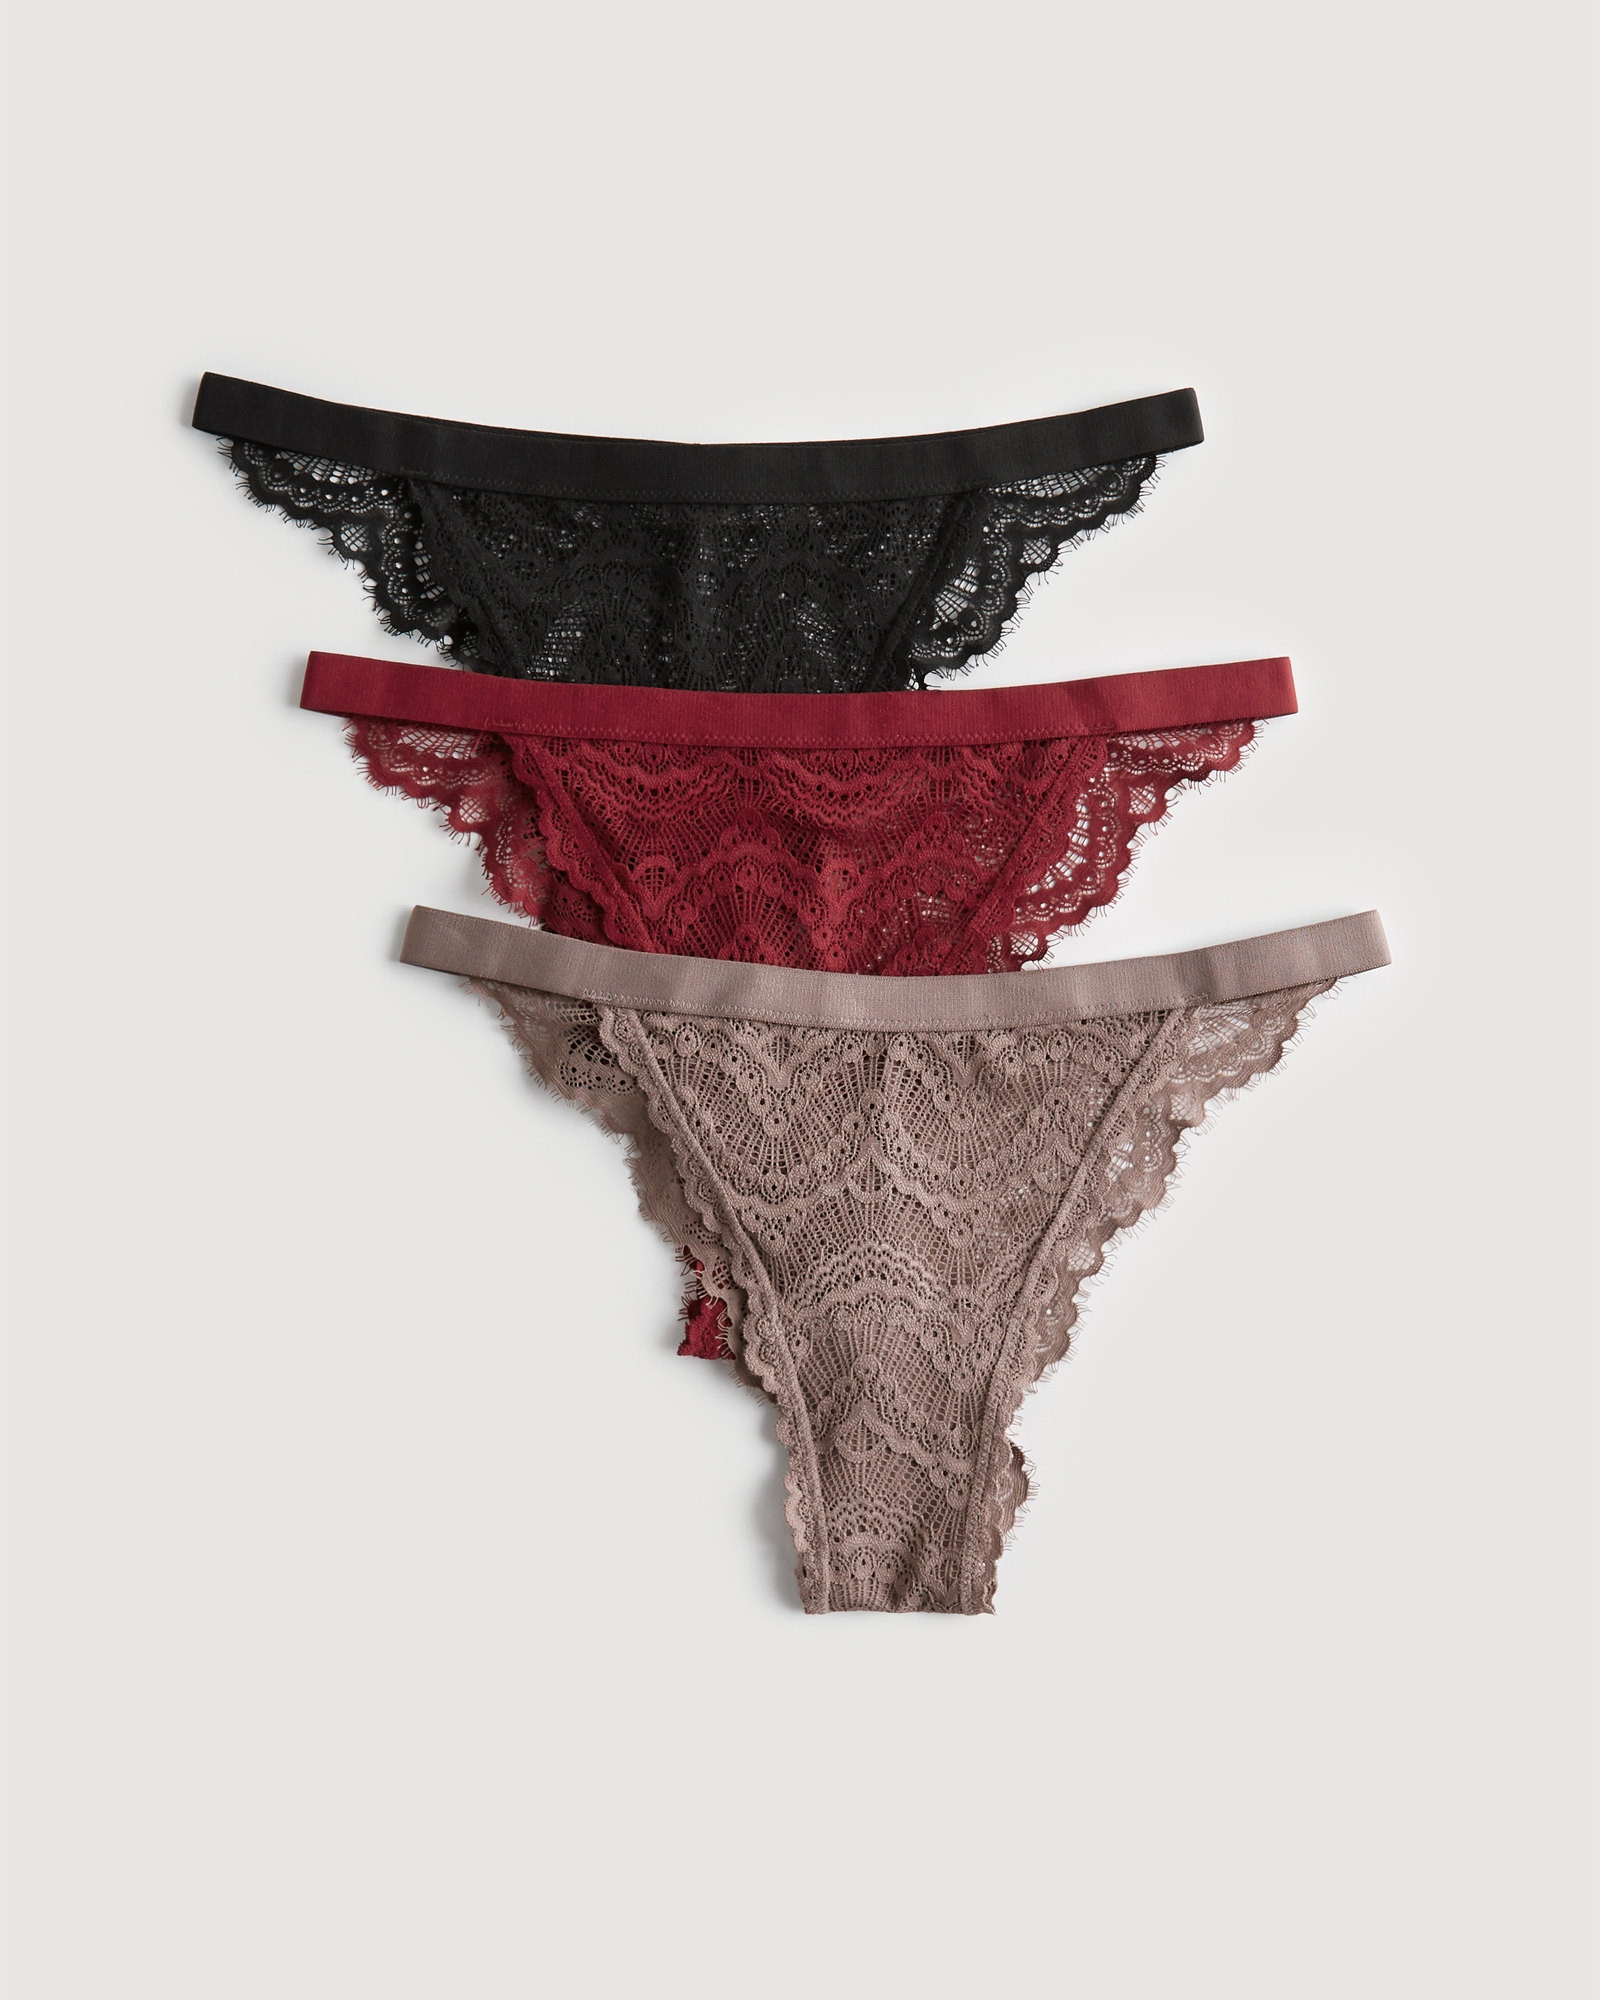 Shop Gilly Hicks Thong Briefs for Women up to 40% Off